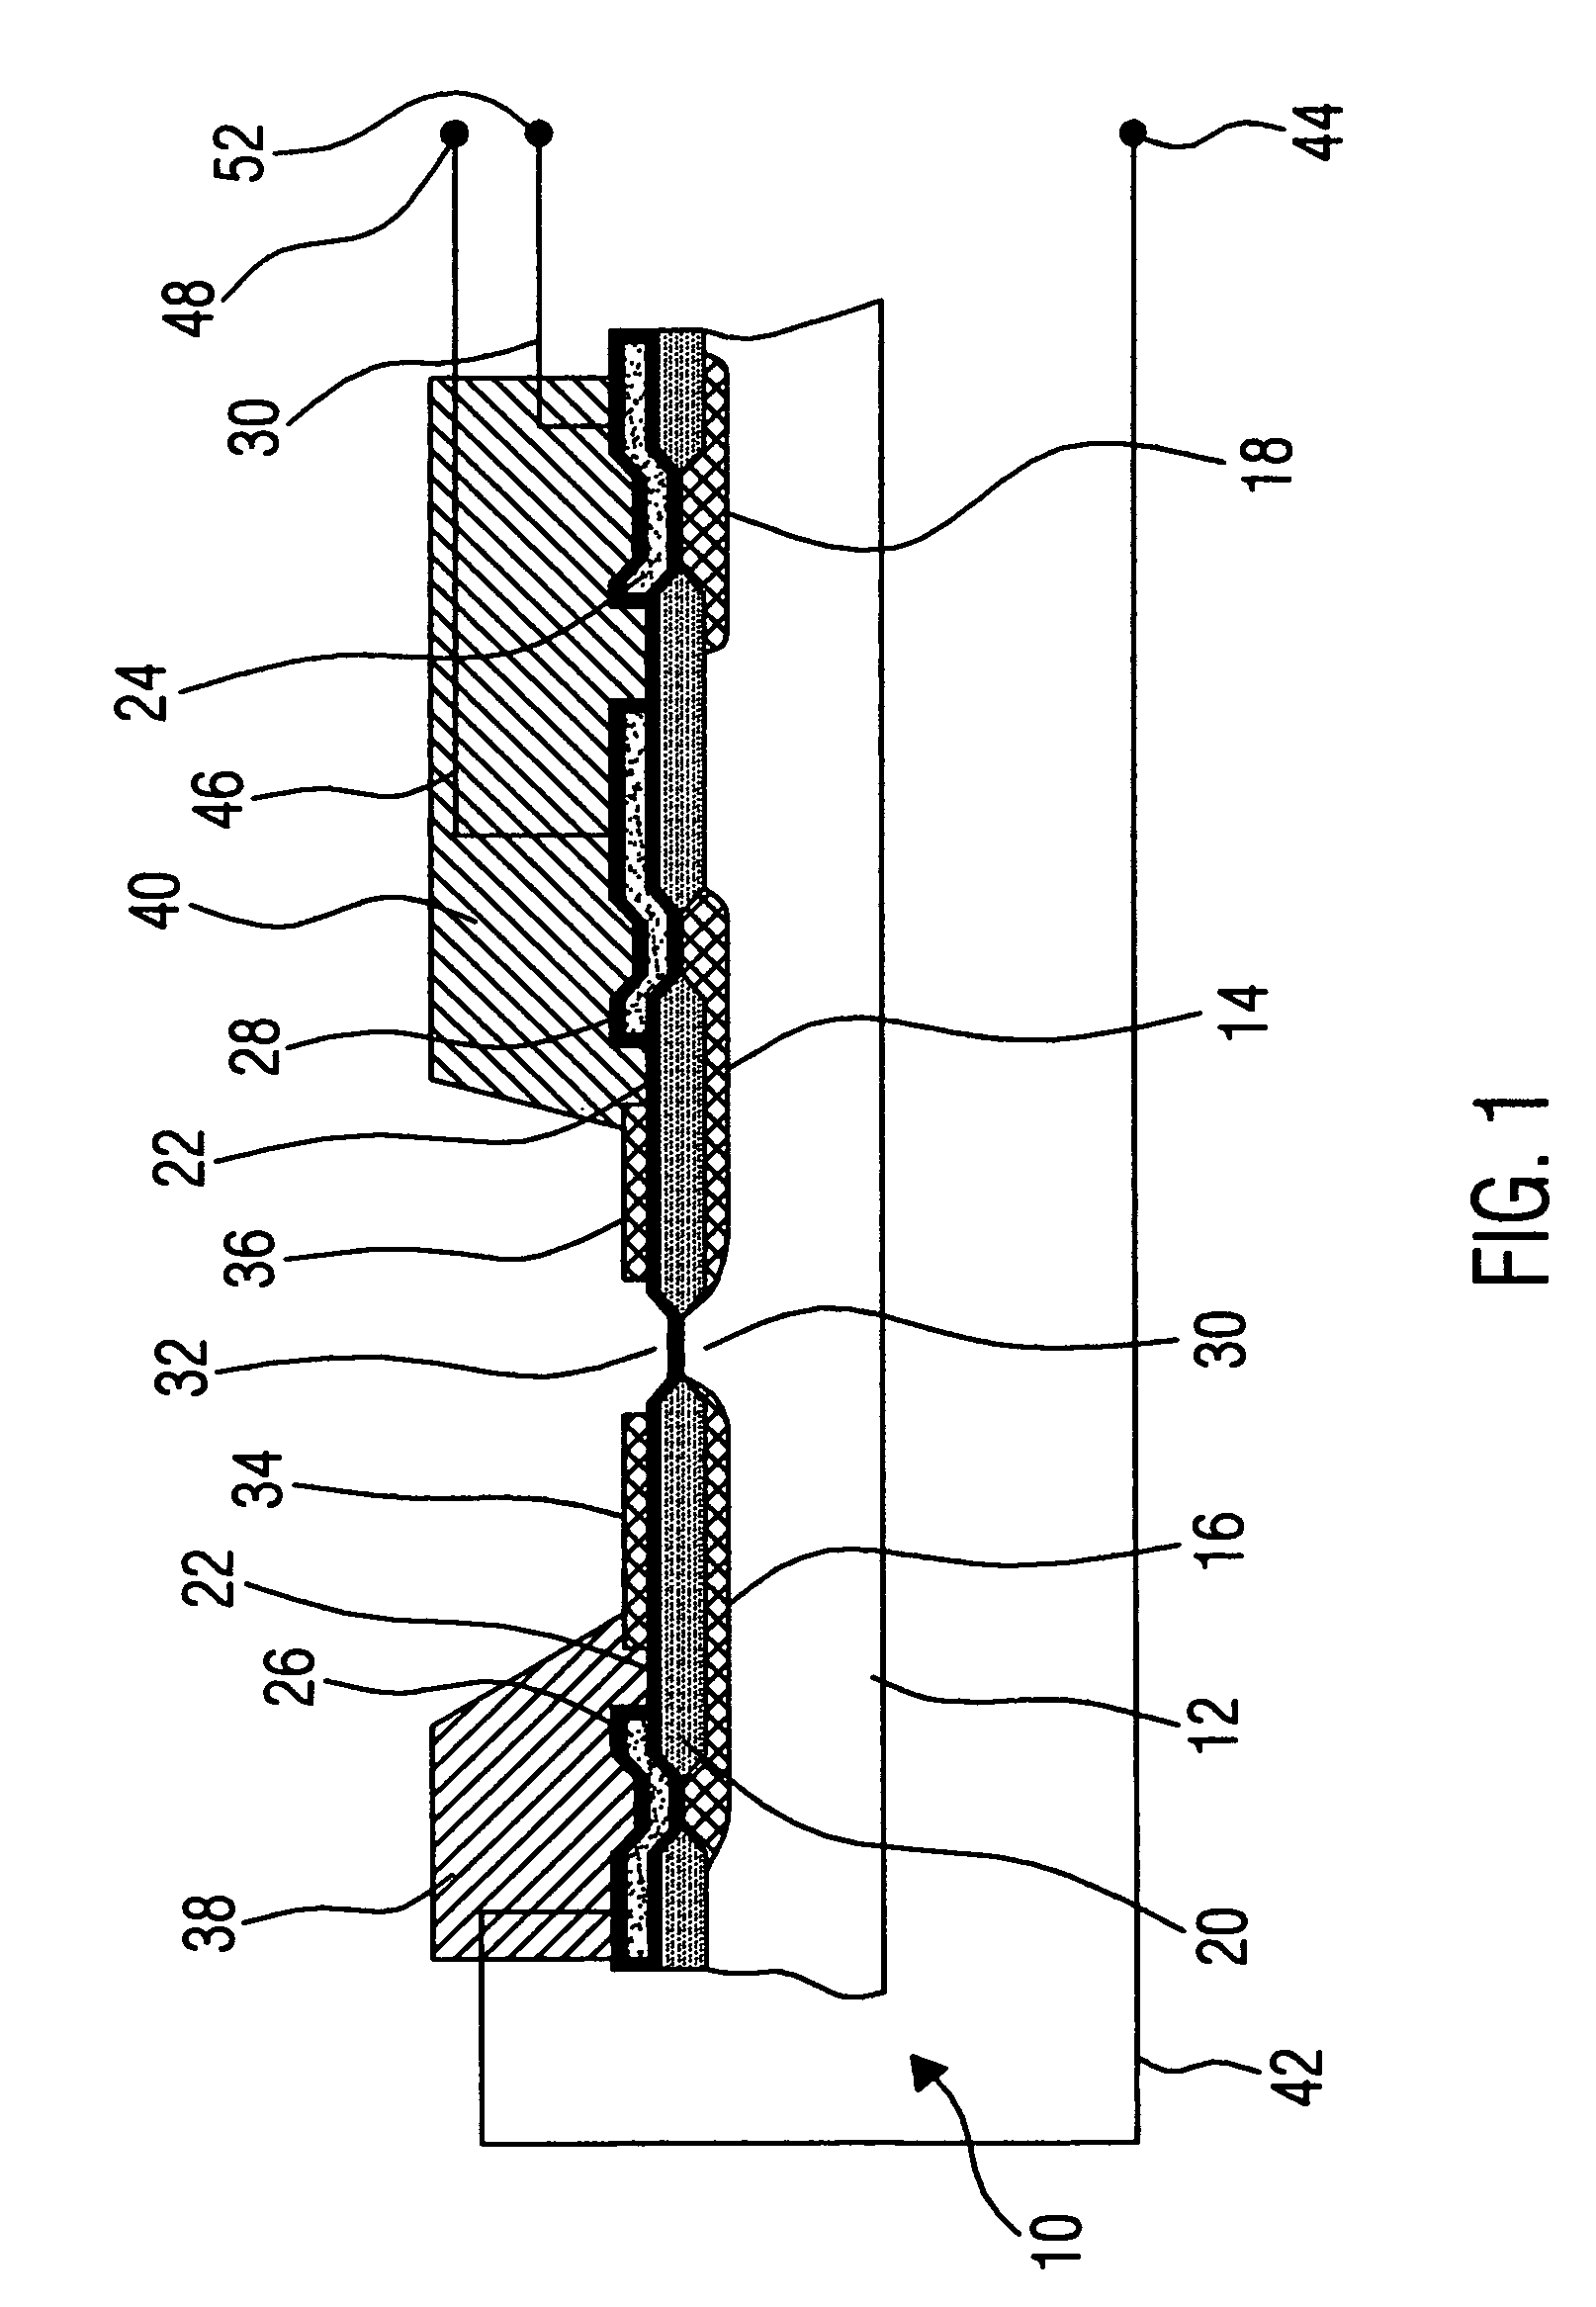 Ion-sensitive field effect transistor and method for producing an ion-sensitive field effect transistor